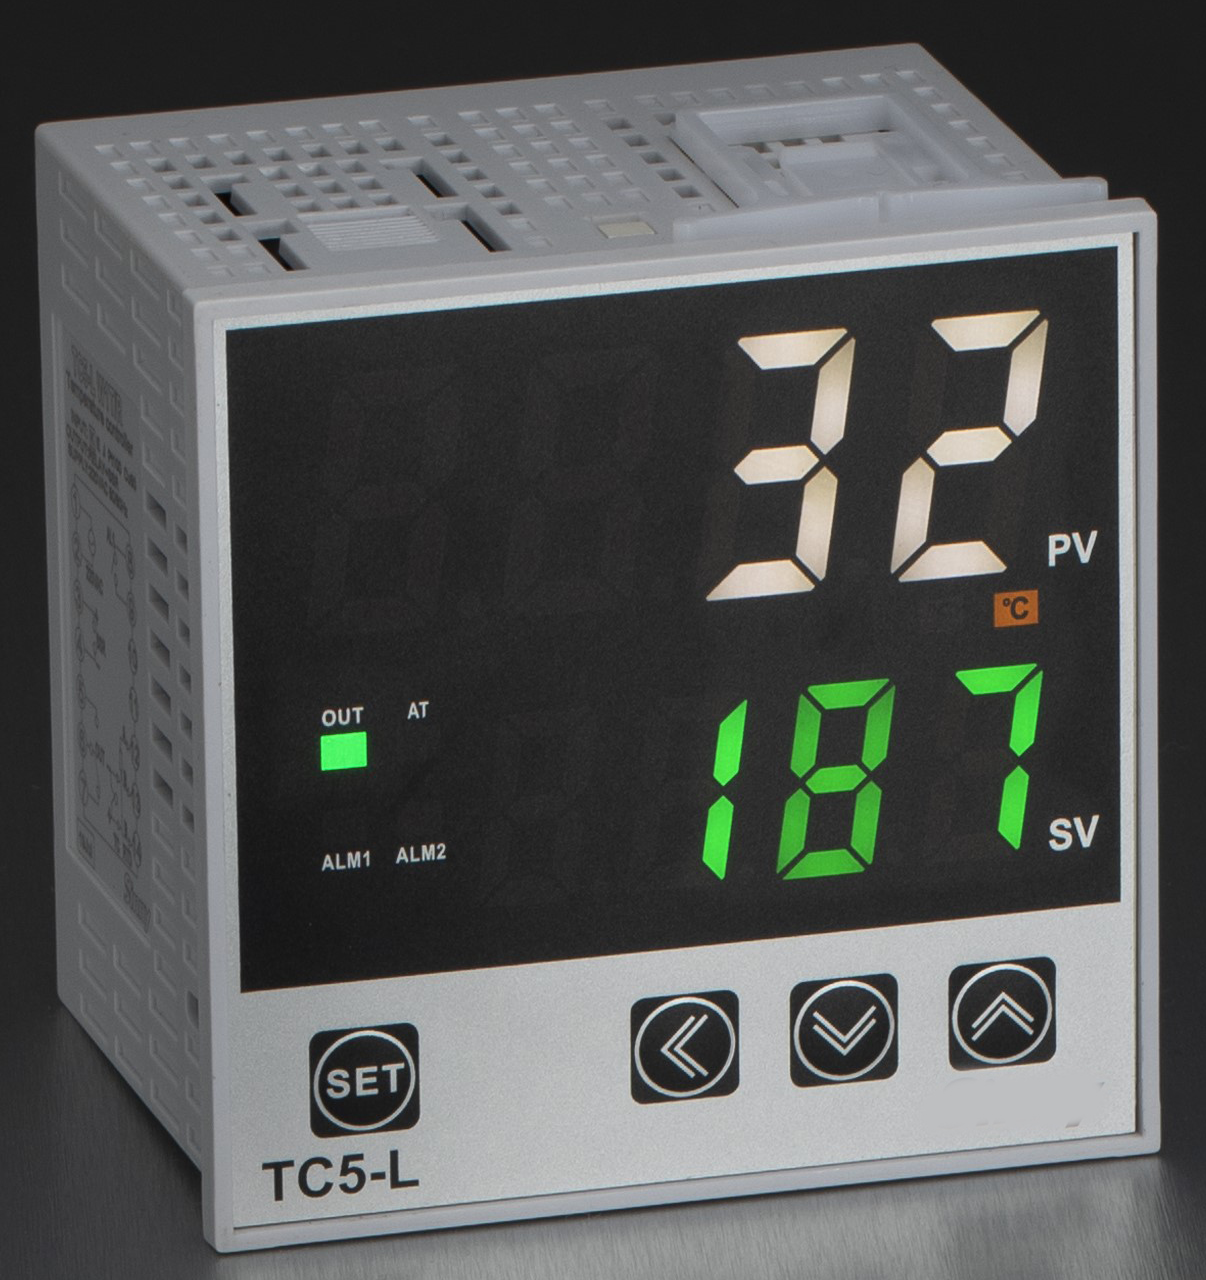 FC5-L-1U-1-G-2-C PID Controller, 100-240VAC with 1 Alarm, RS485, K,E,J,N,T,S,R,B Thermocouple, Linear Current/Voltage and  PT100/Cu20 RTD Input, 96x96mm,0-10V Output